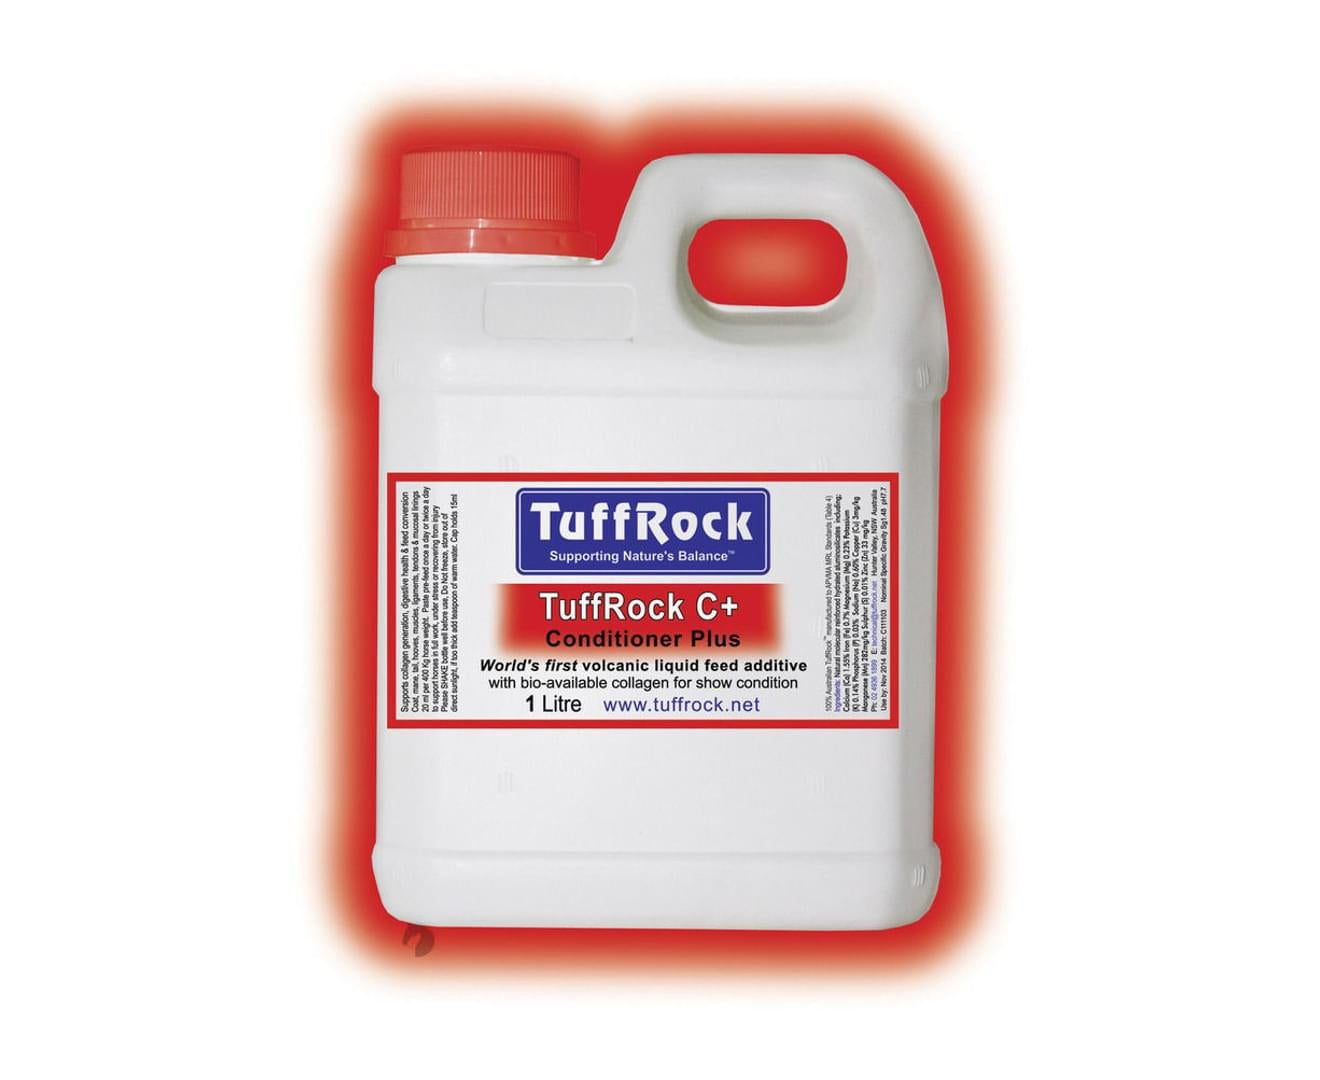 TuffRock Conditioner Plus for Digestive Health Horse Equine - 3 Sizes